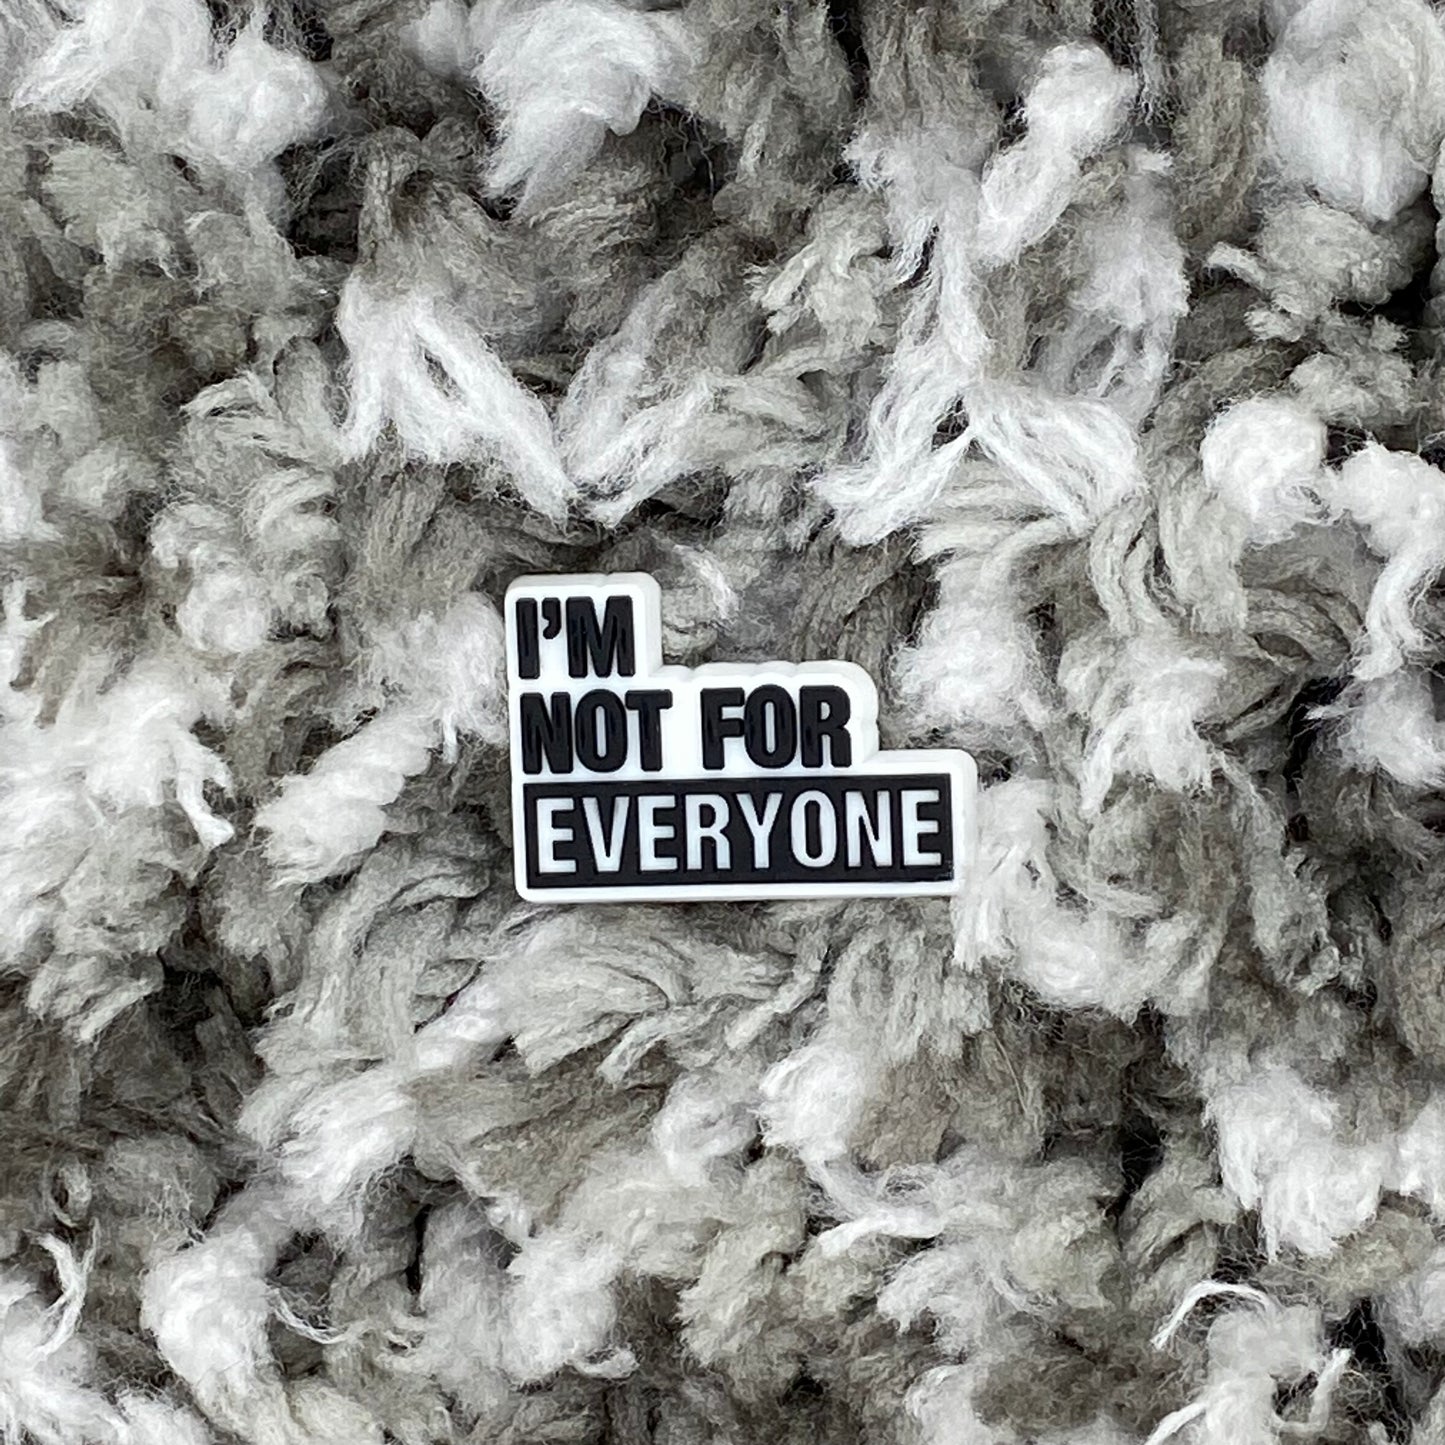 I’m not for everyone